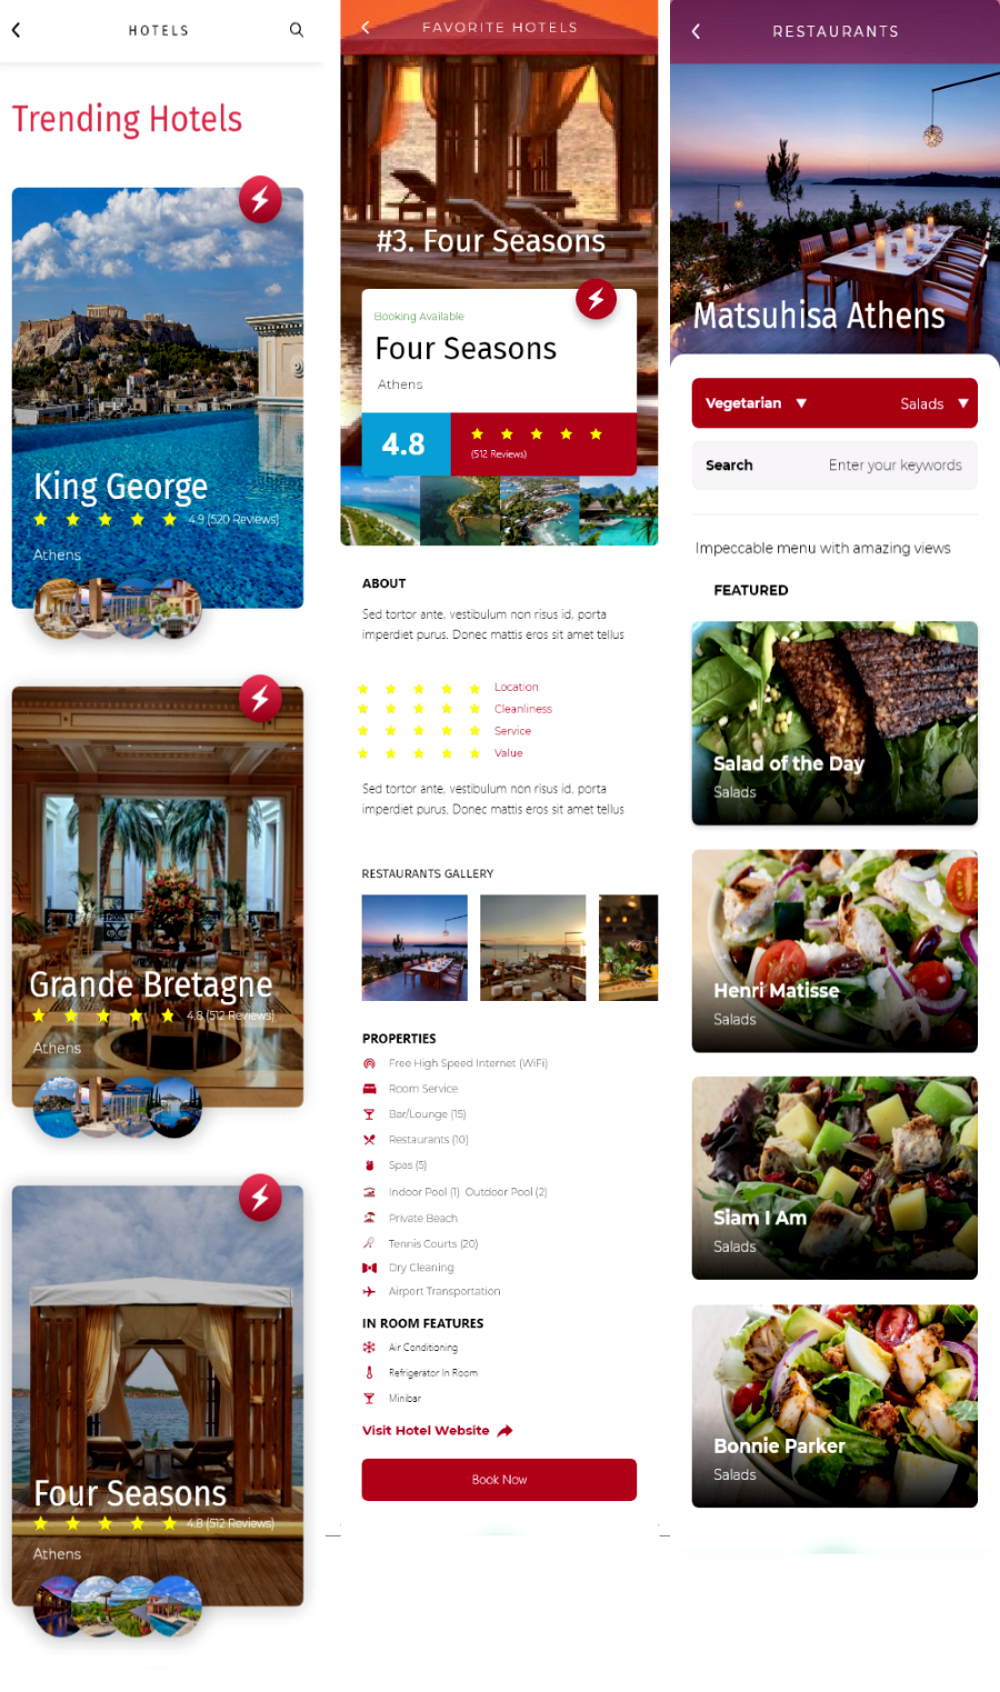 sample from the Frommer's app including hotels and restaurants with images, listings and reviews